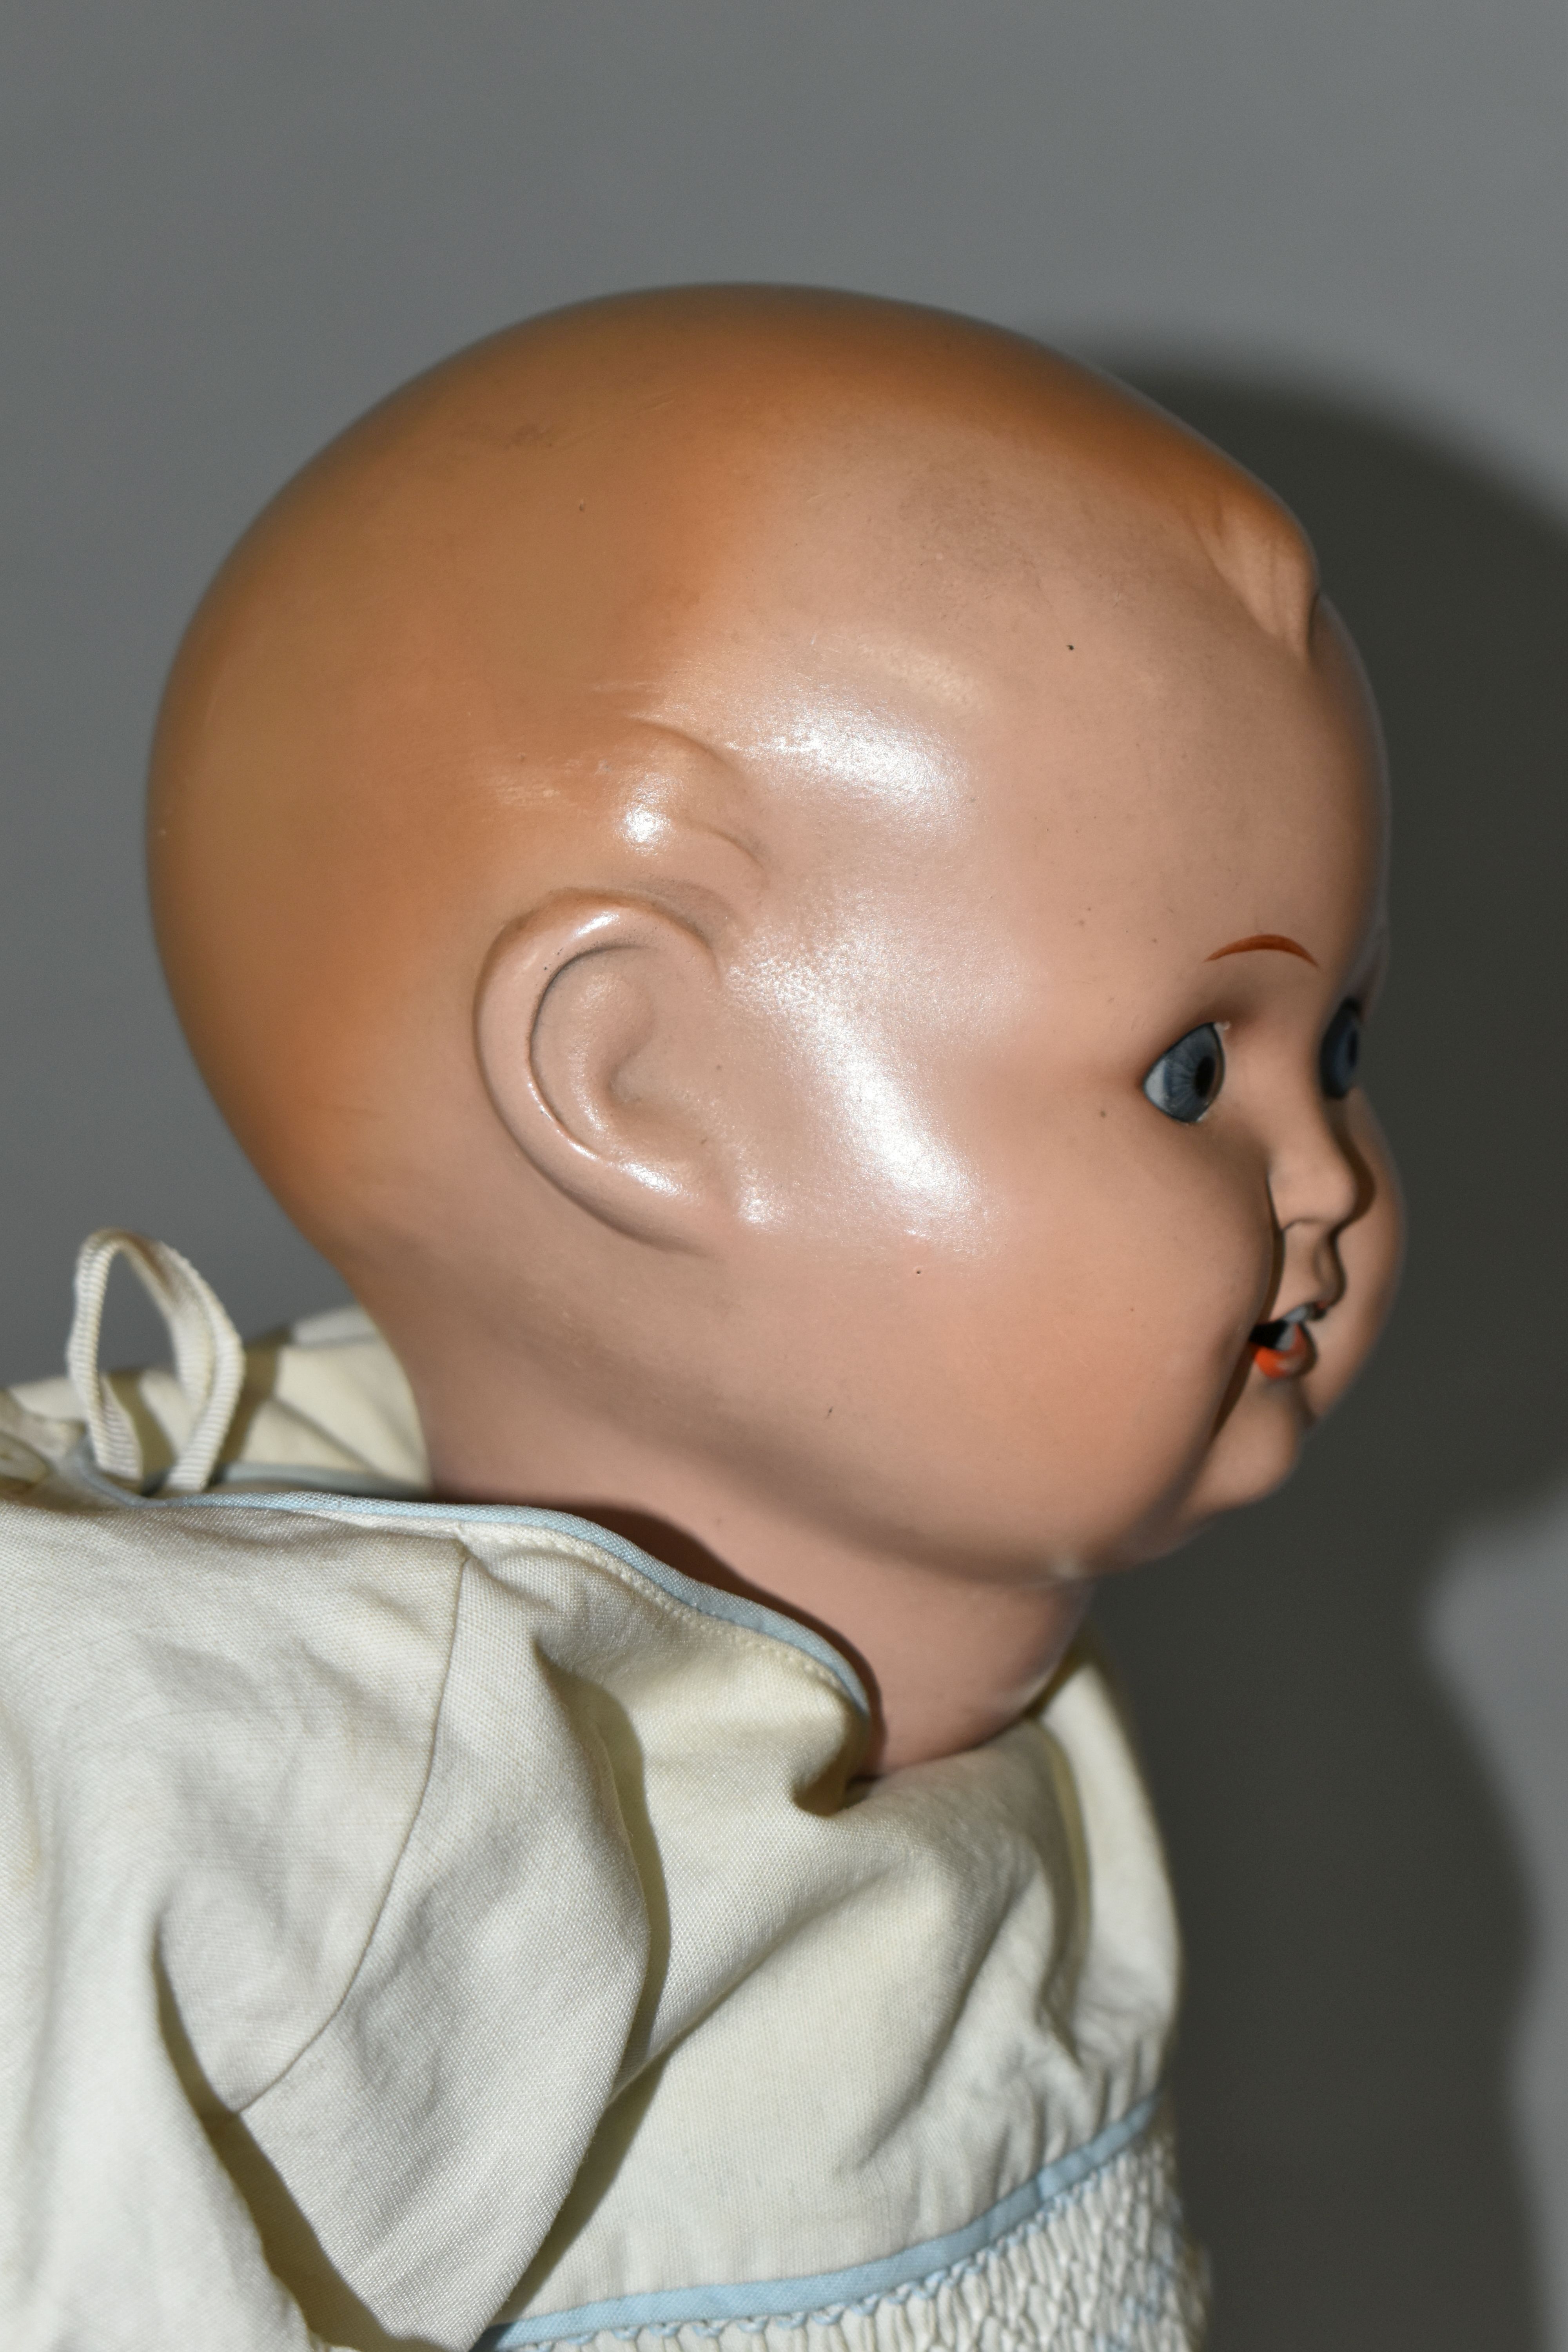 A HUGO WIEGARD DOLL, with bisque head, closing eyes, an open mouth showing two teeth, composite body - Image 3 of 7